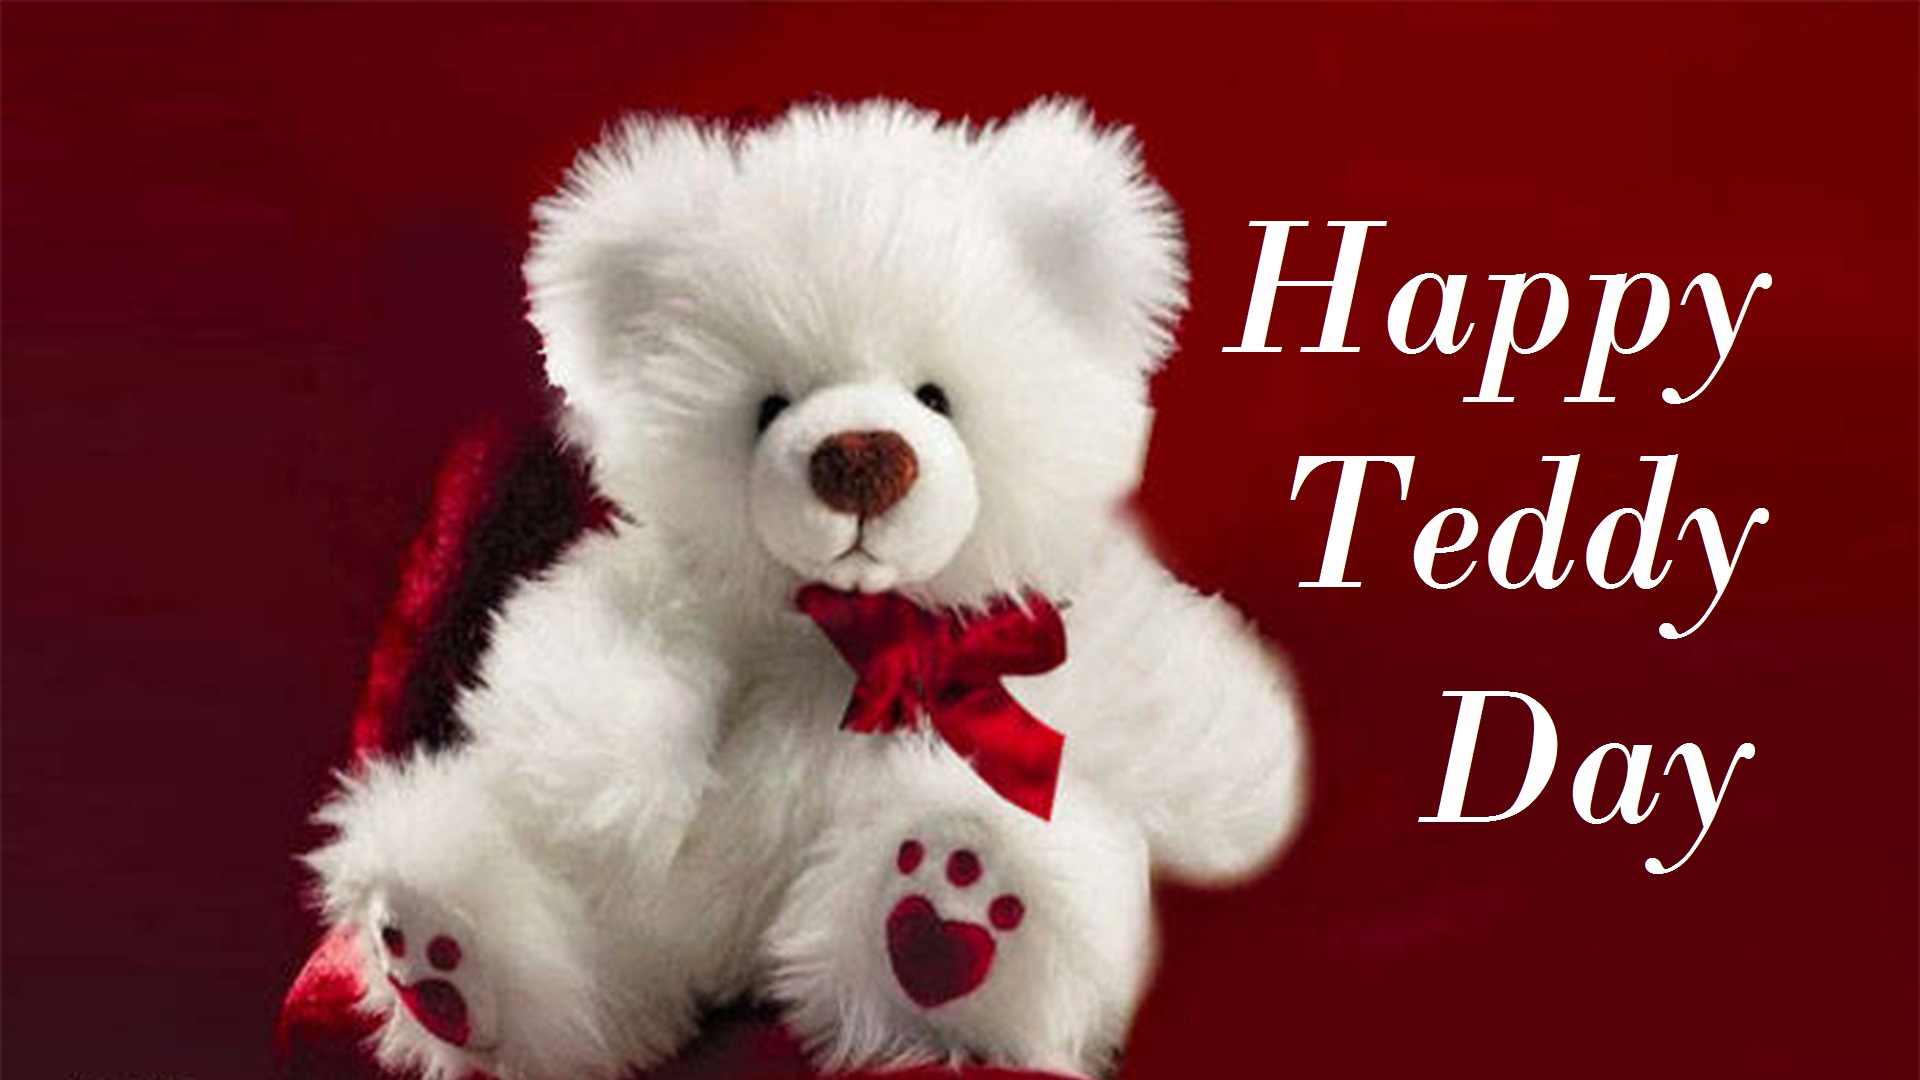 happy teddy day images 2018